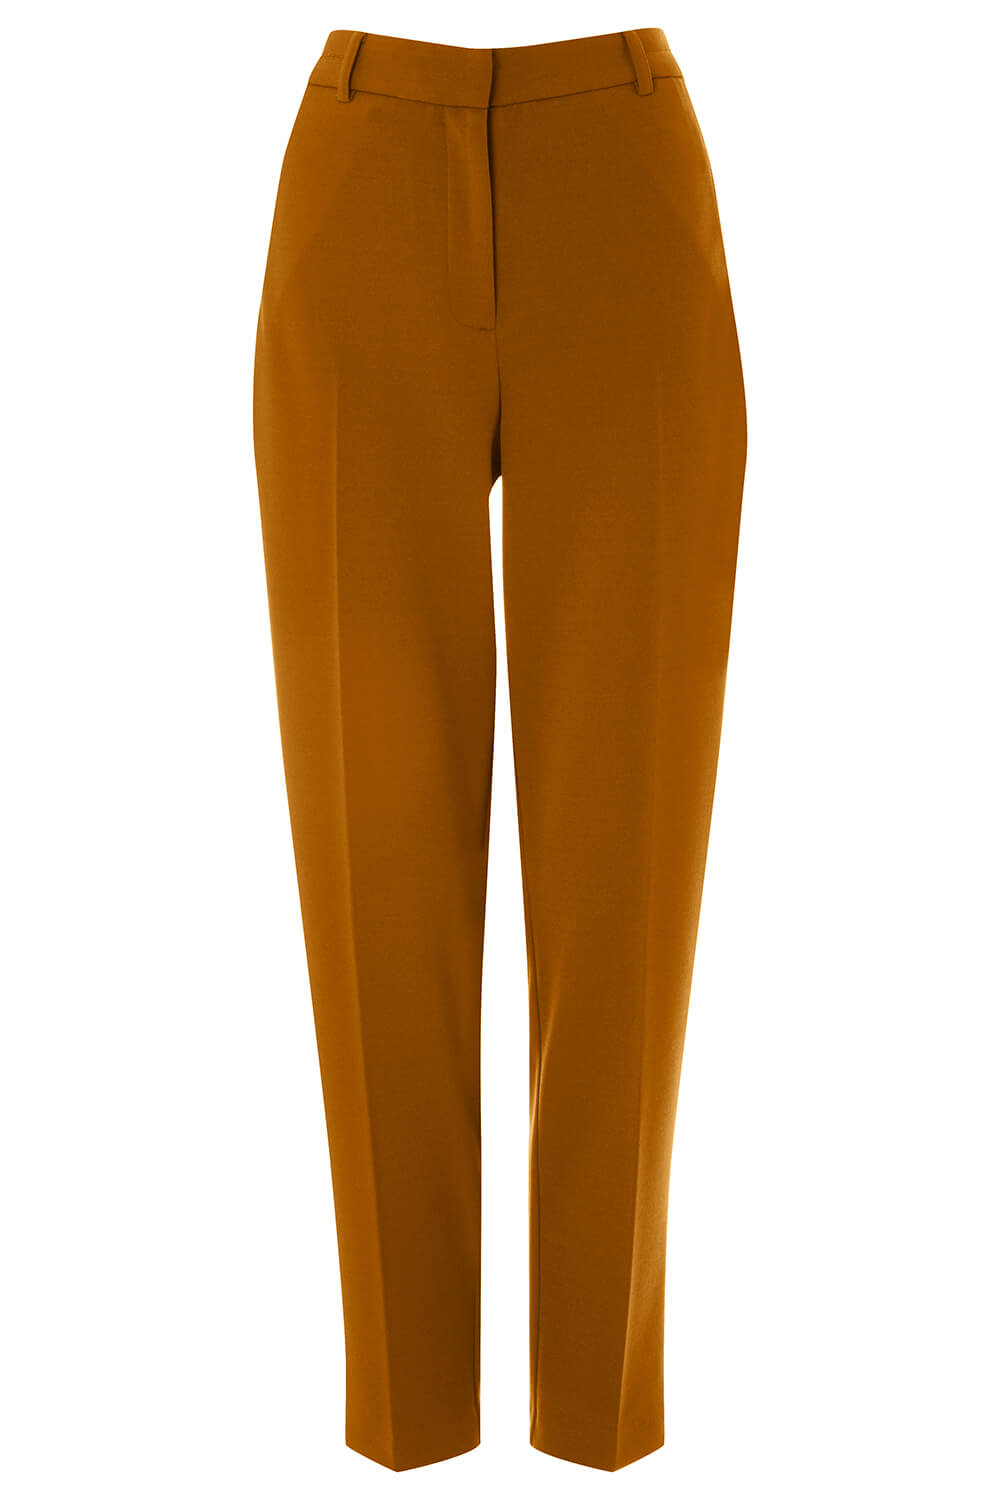 Camel  Straight Leg Stretch Trouser, Image 5 of 5